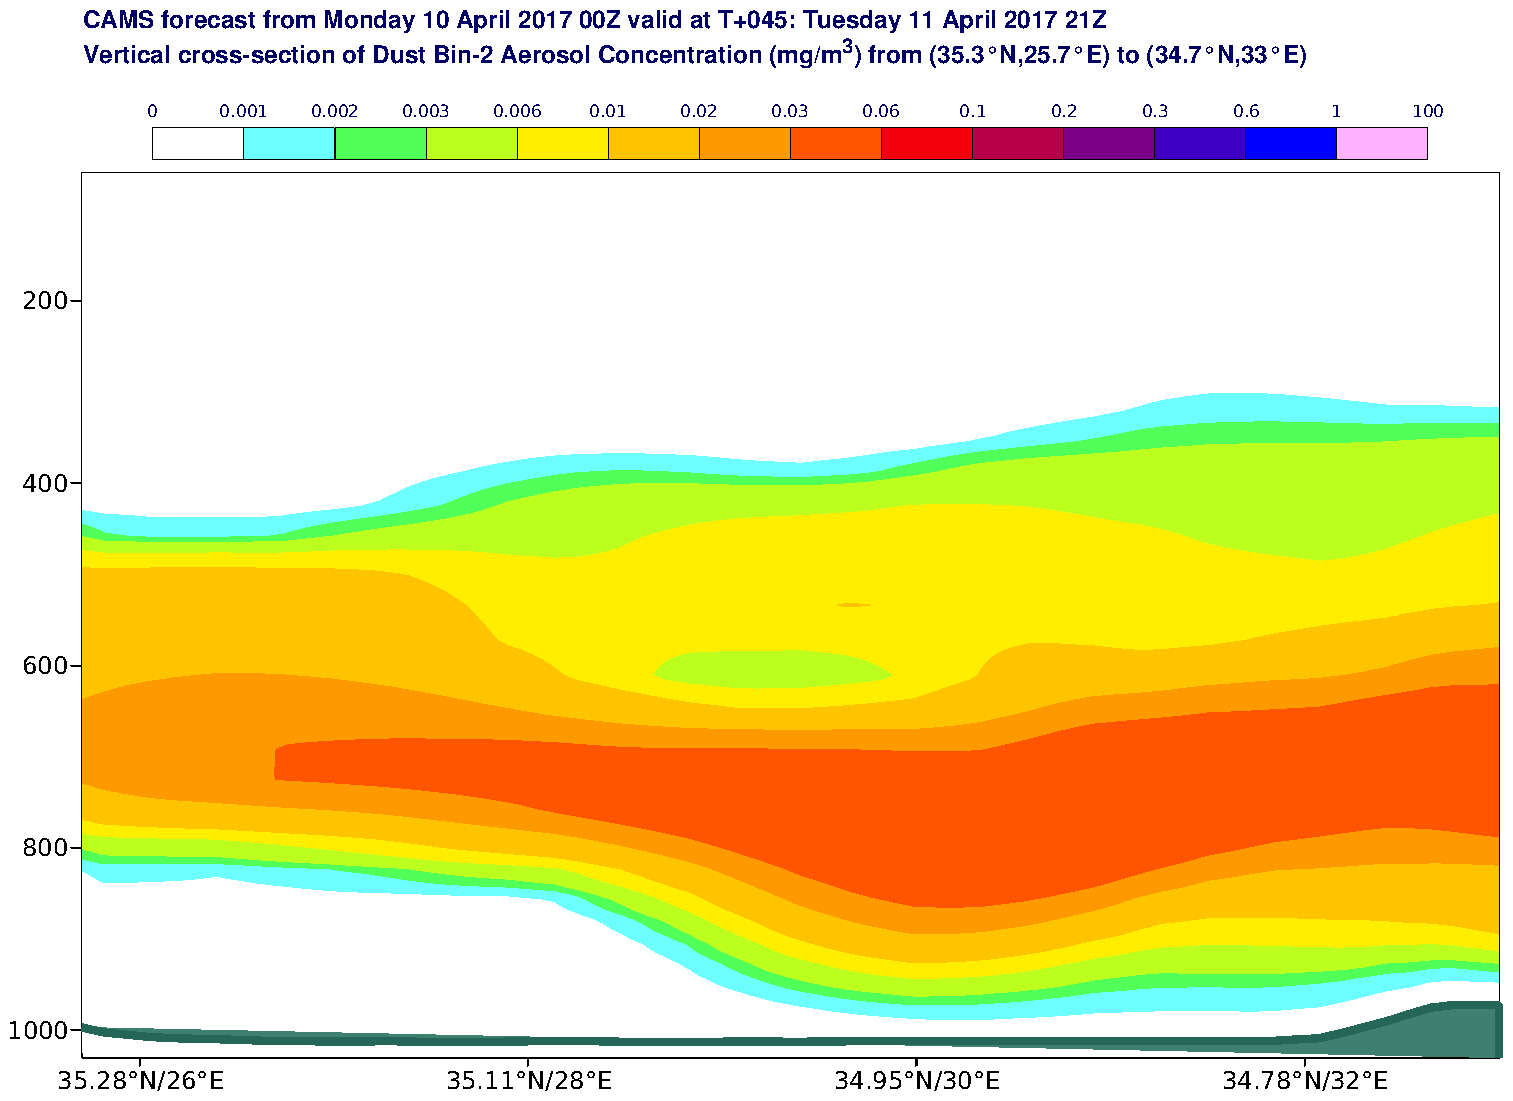 Vertical cross-section of Dust Bin-2 Aerosol Concentration (mg/m3) valid at T45 - 2017-04-11 21:00